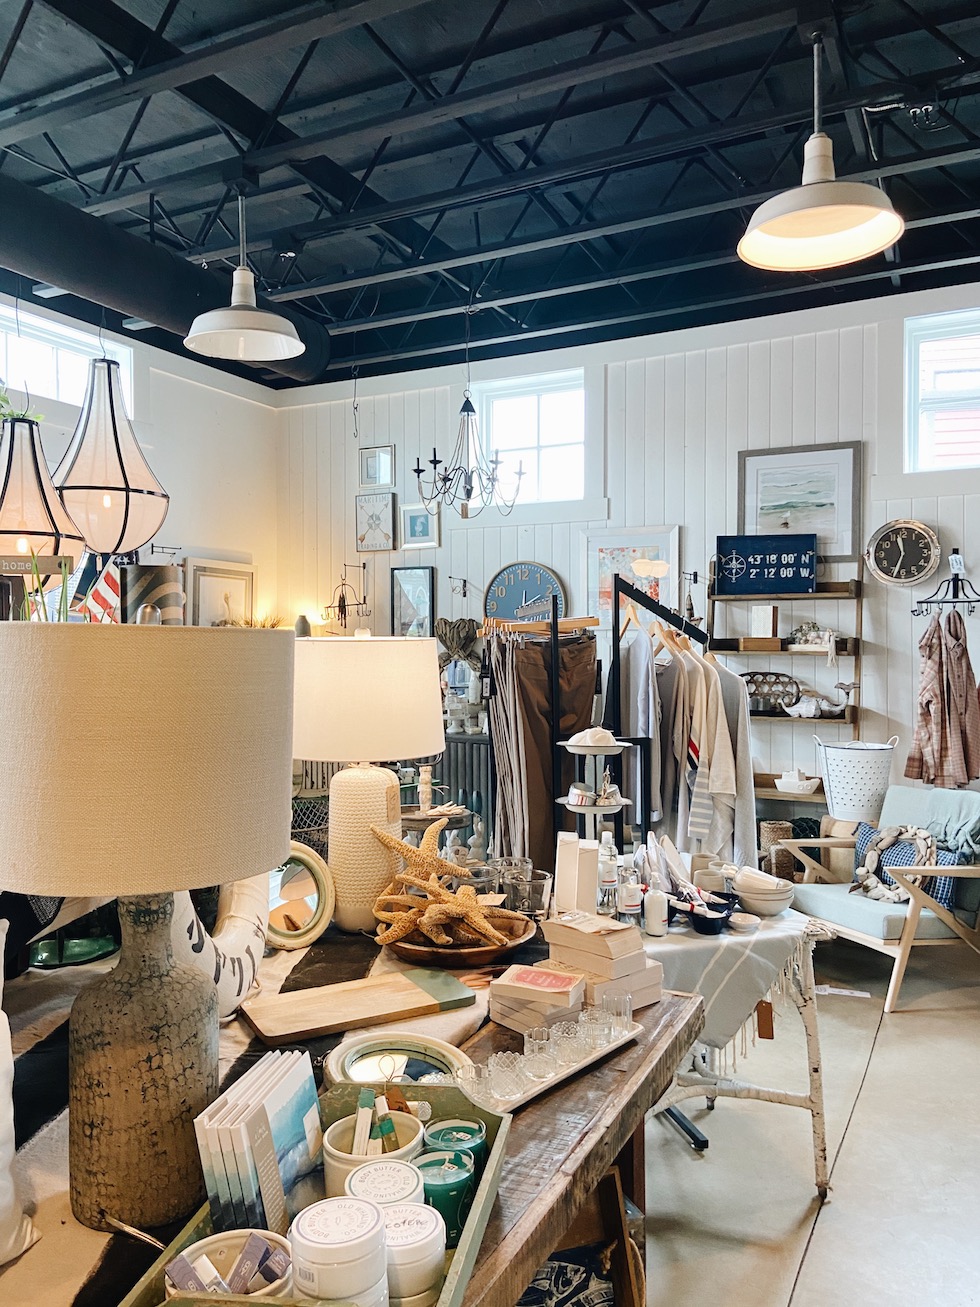 Out to See: Seaworthy Home Shop in Seabrook